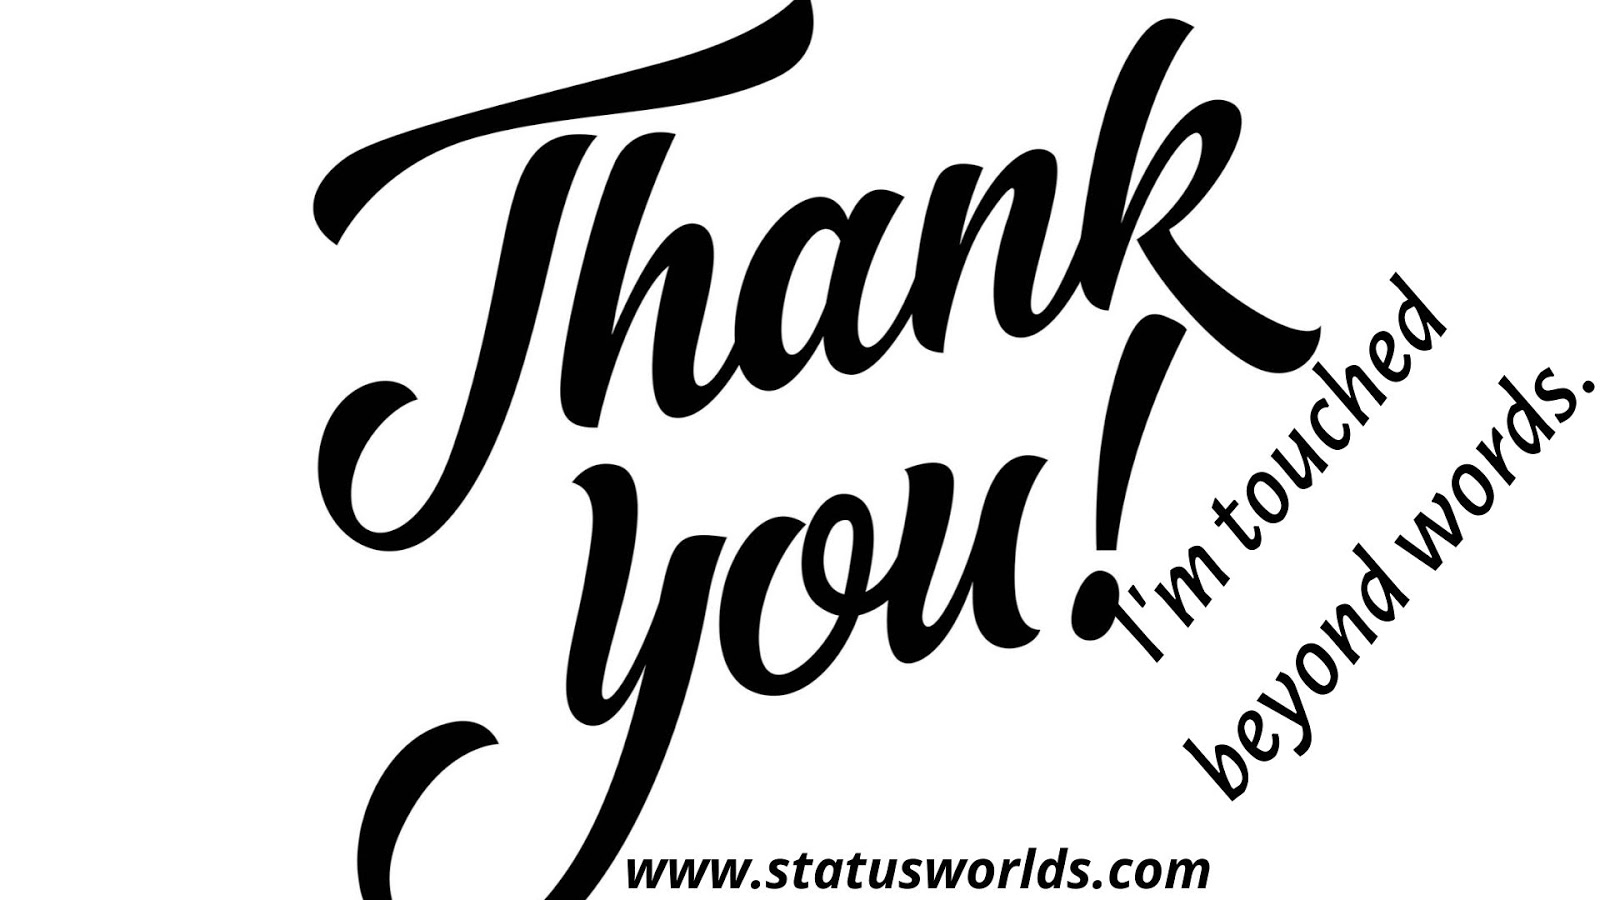 Thank You Status And Quotes For The One Who Helped You - Status World